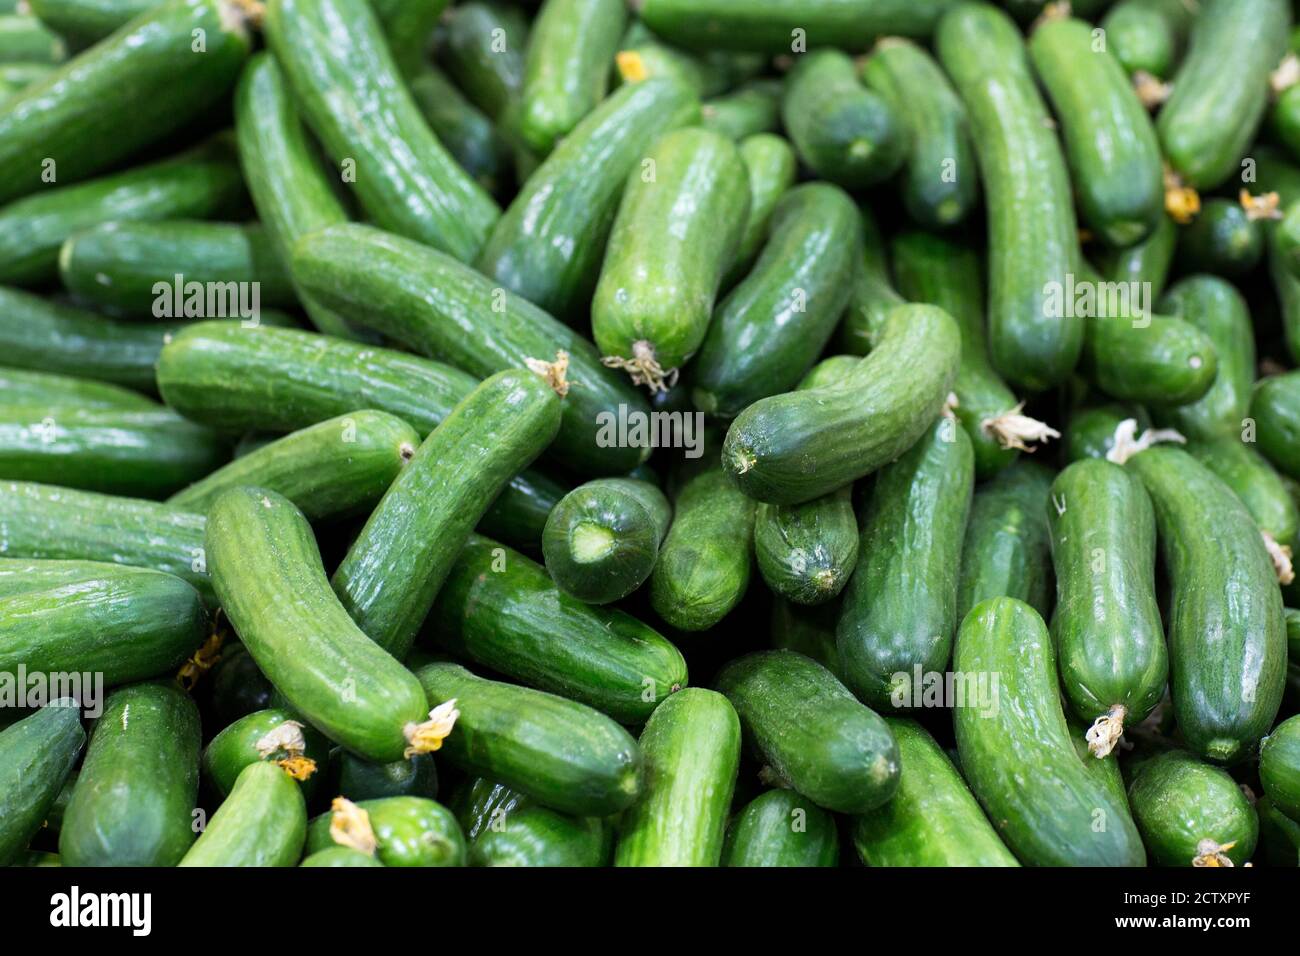 Pile of cucumbers close-up in a healthy food market. Stock Photo